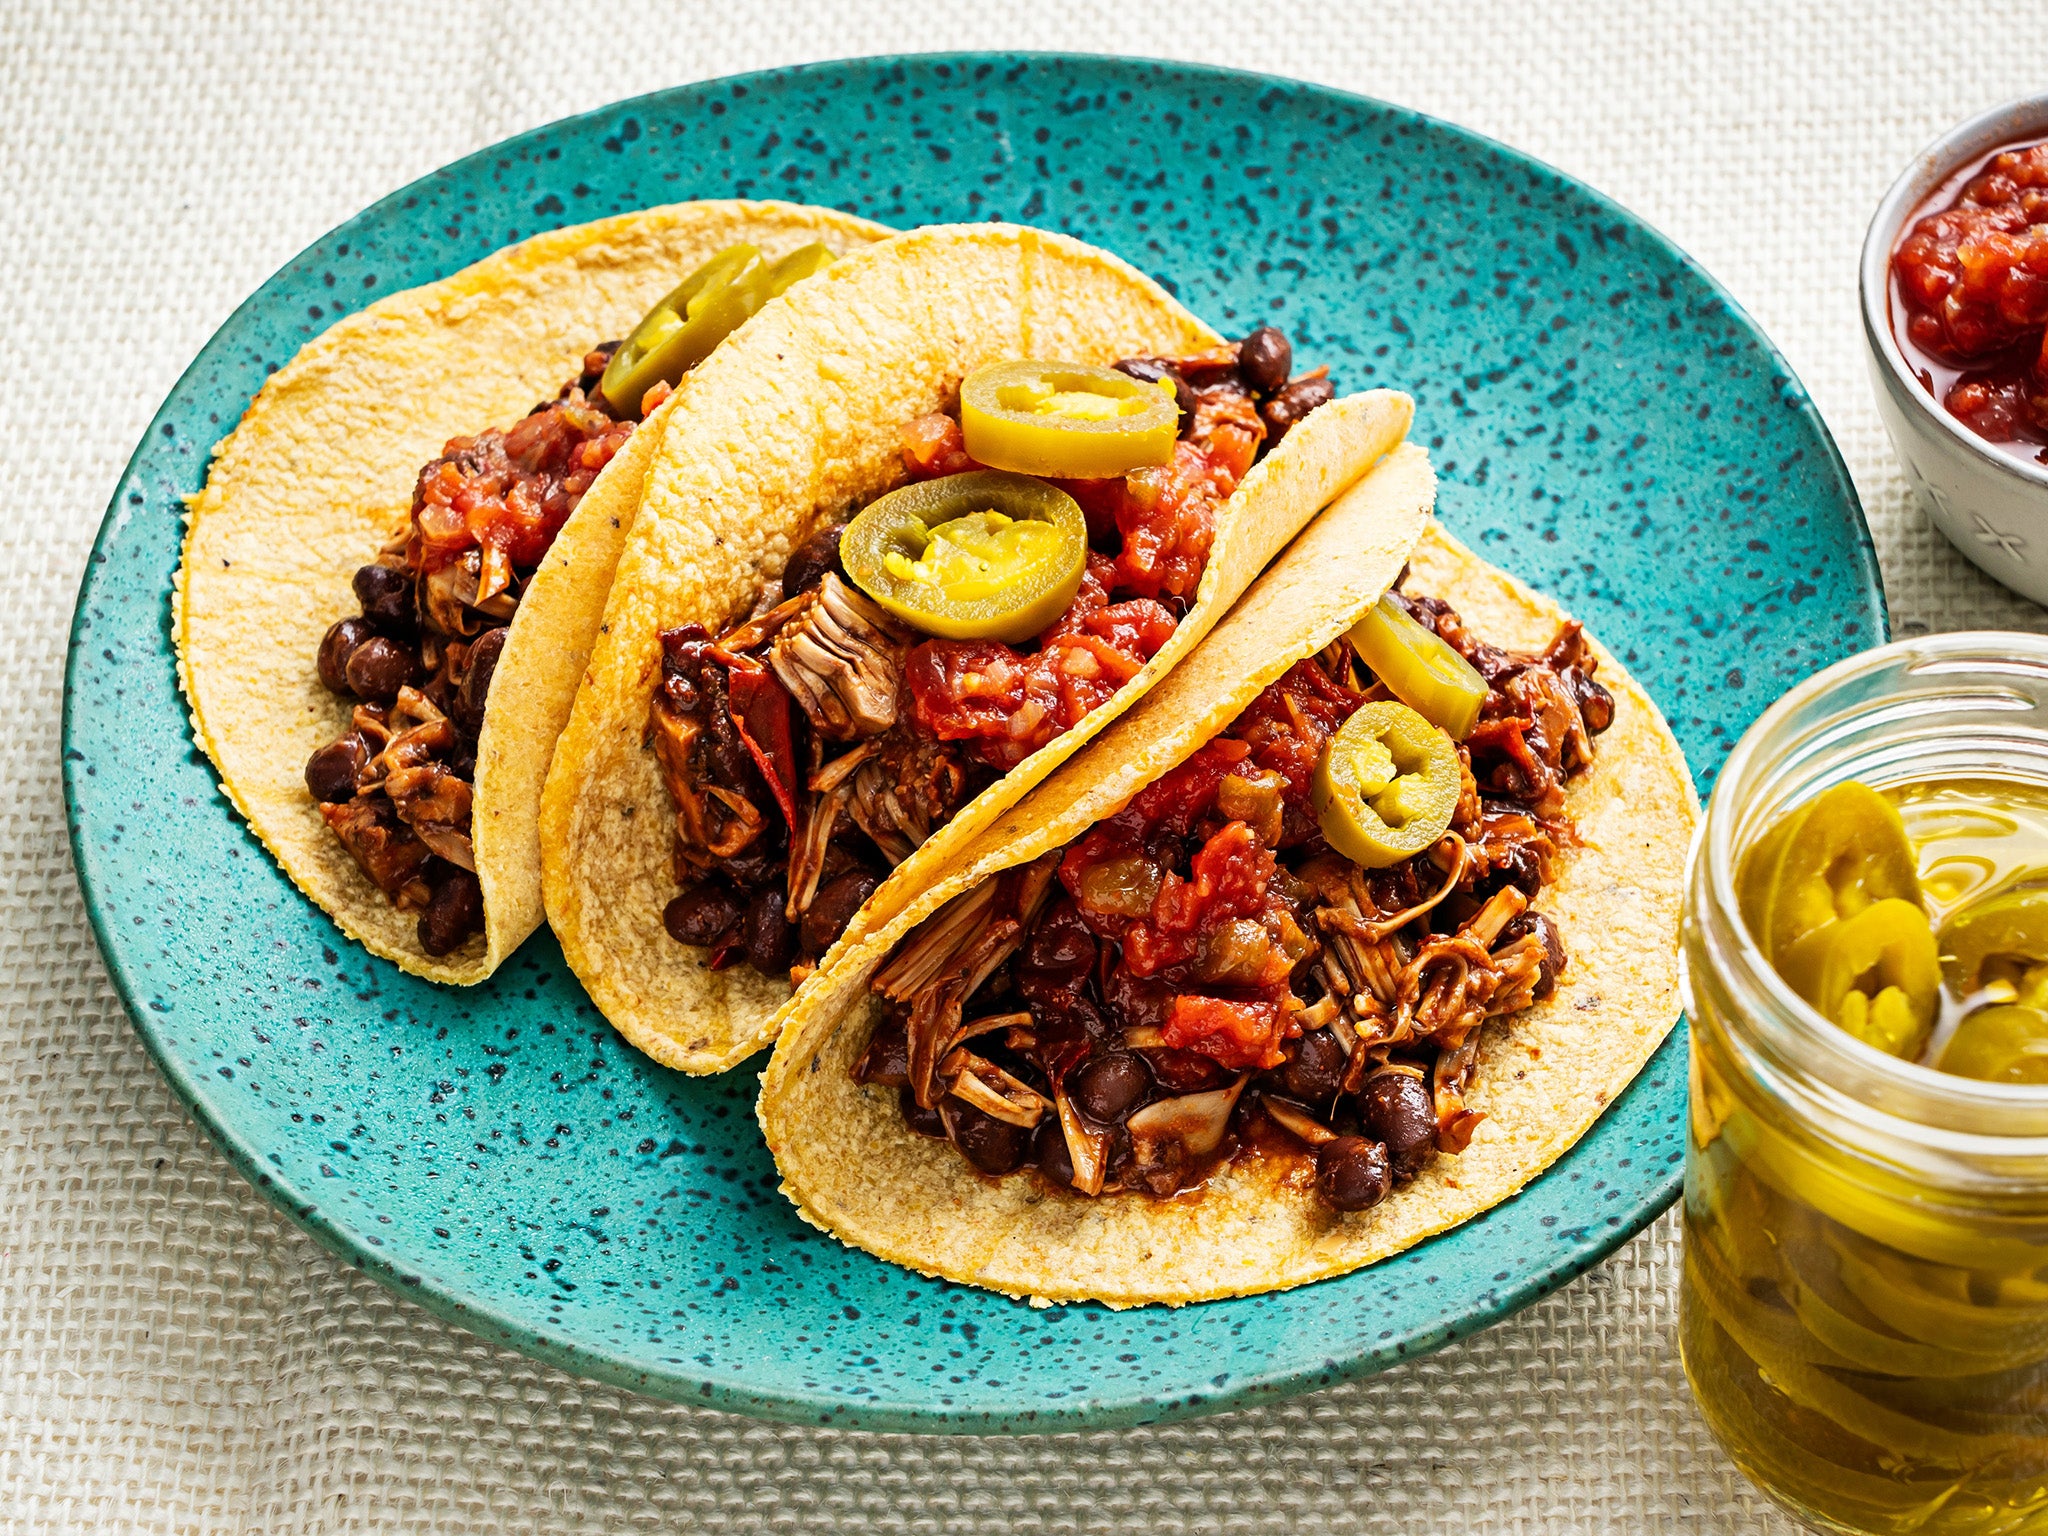 After just a few minutes on the stove, these tacos are ready to go